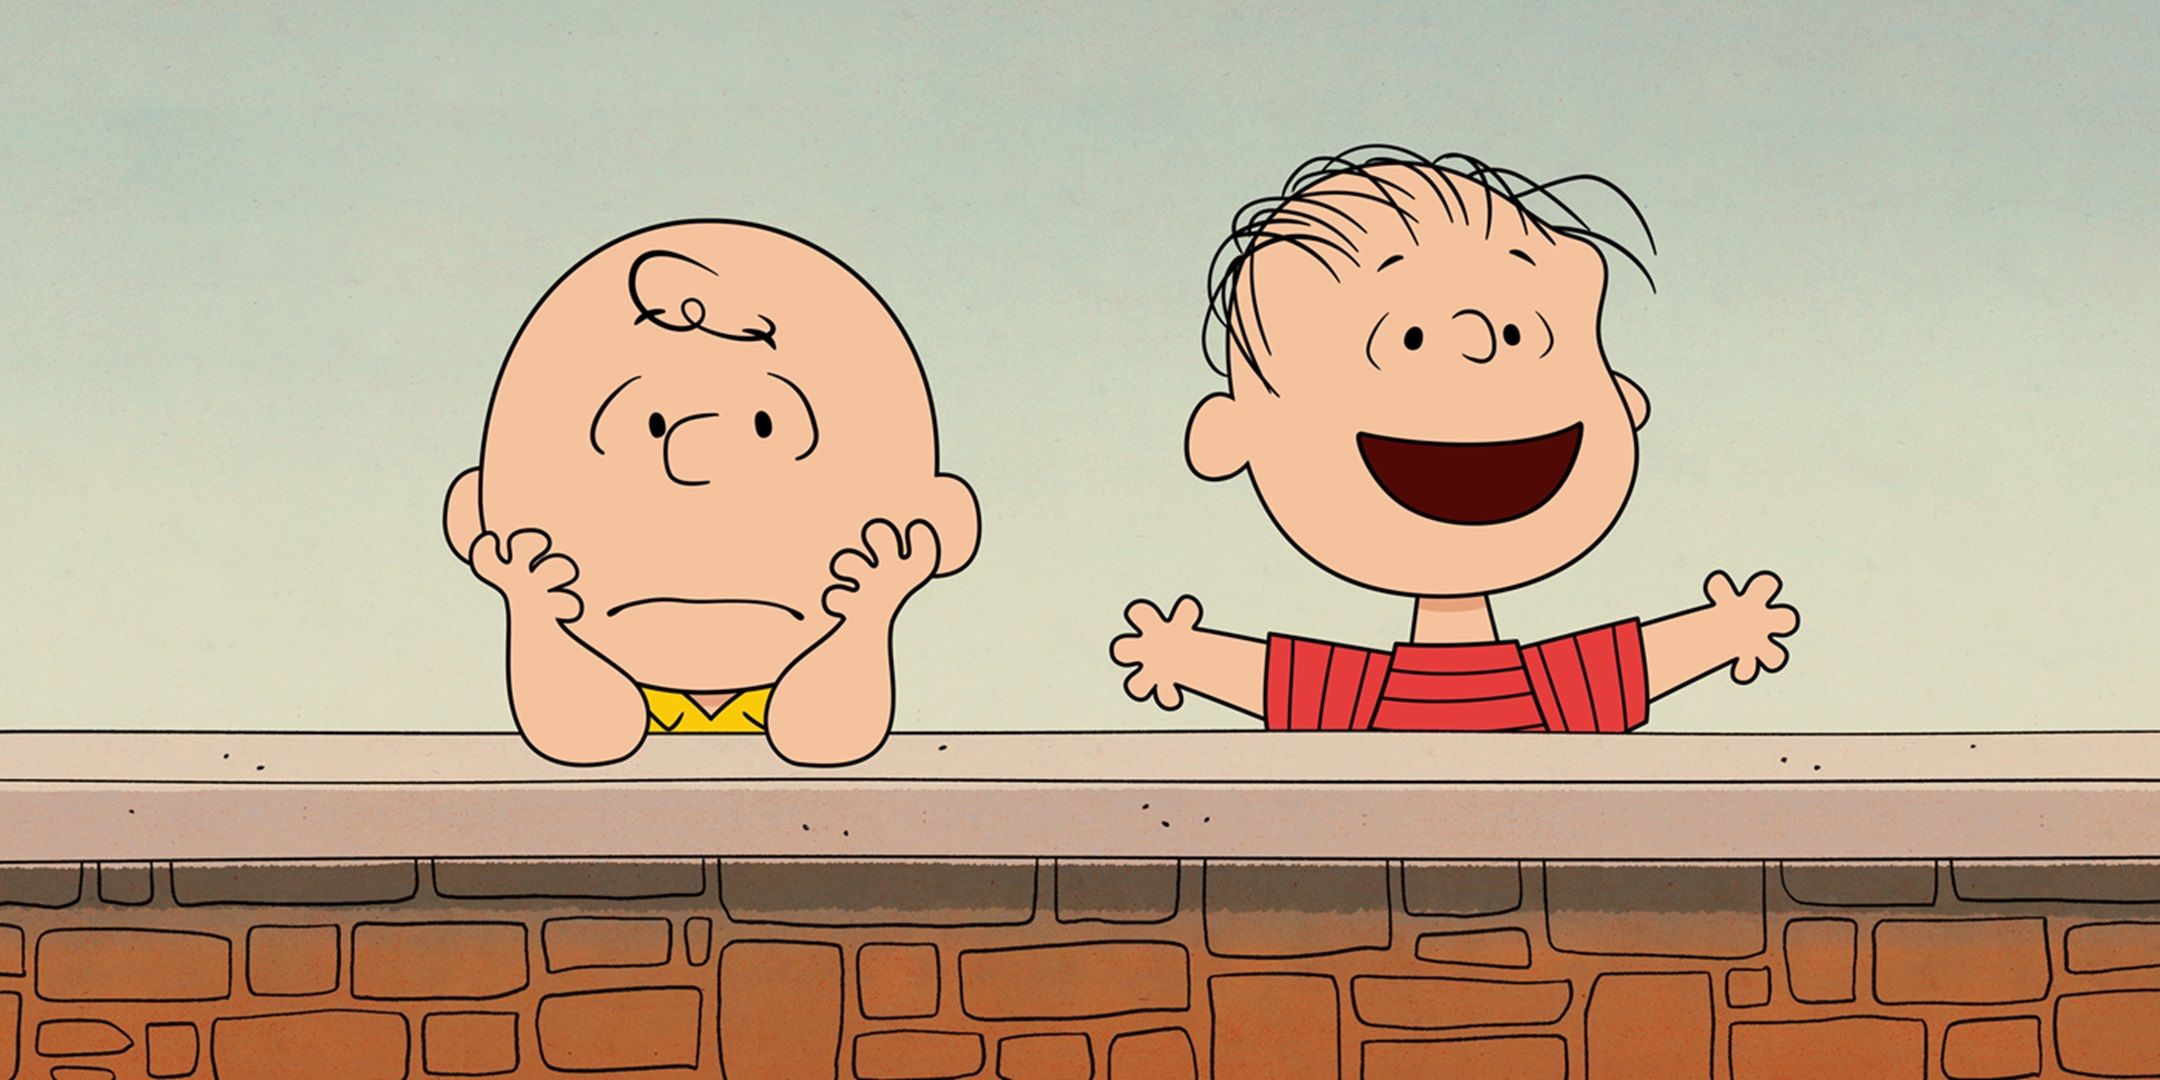 Charlie Brown and Linus hang out on the ledge